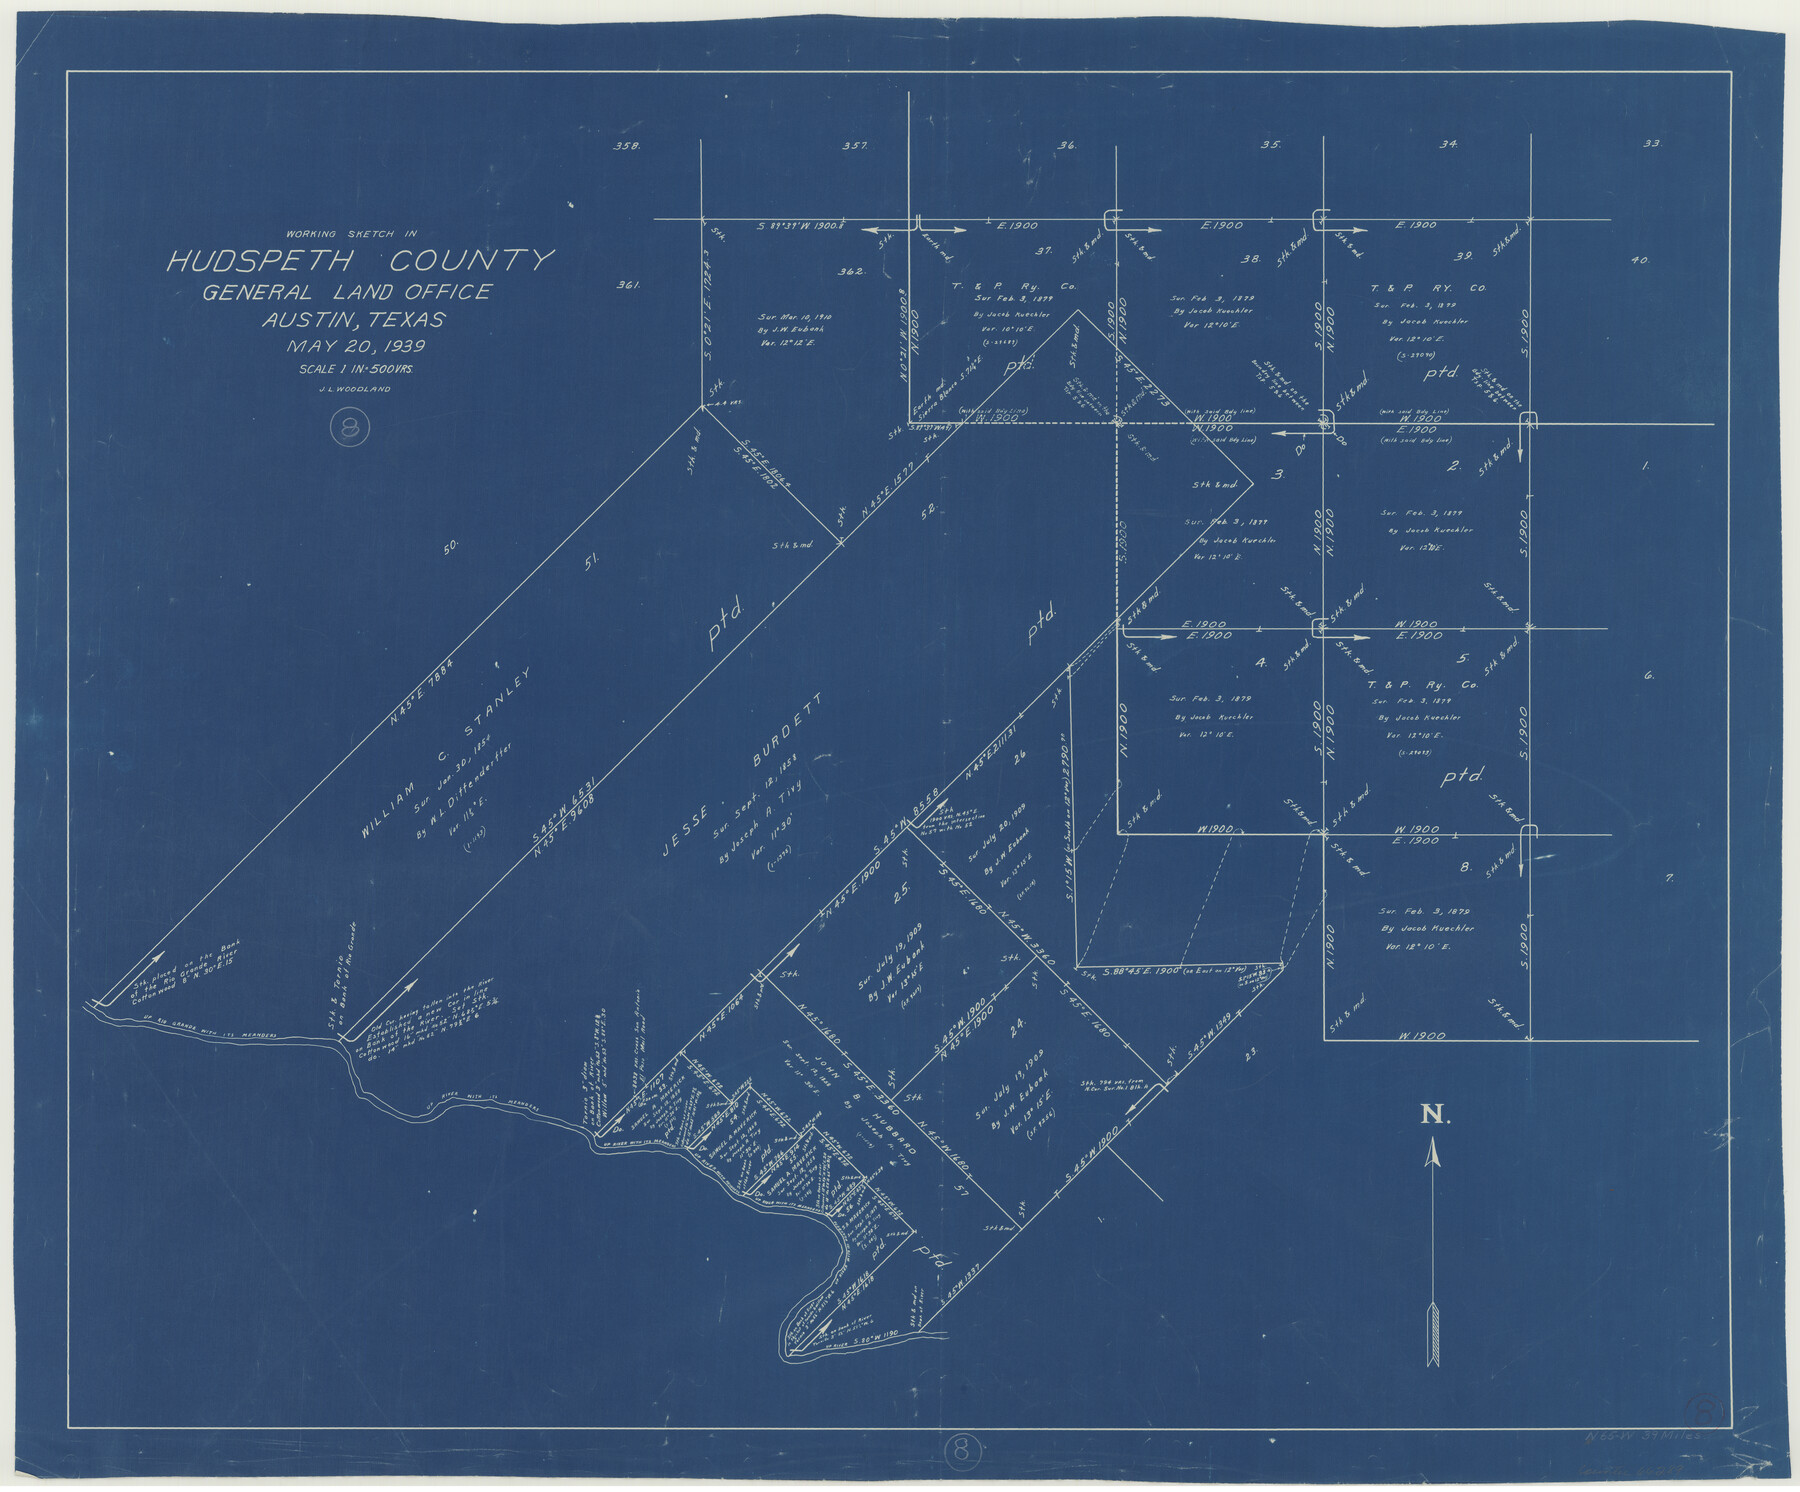 66289, Hudspeth County Working Sketch 8, General Map Collection